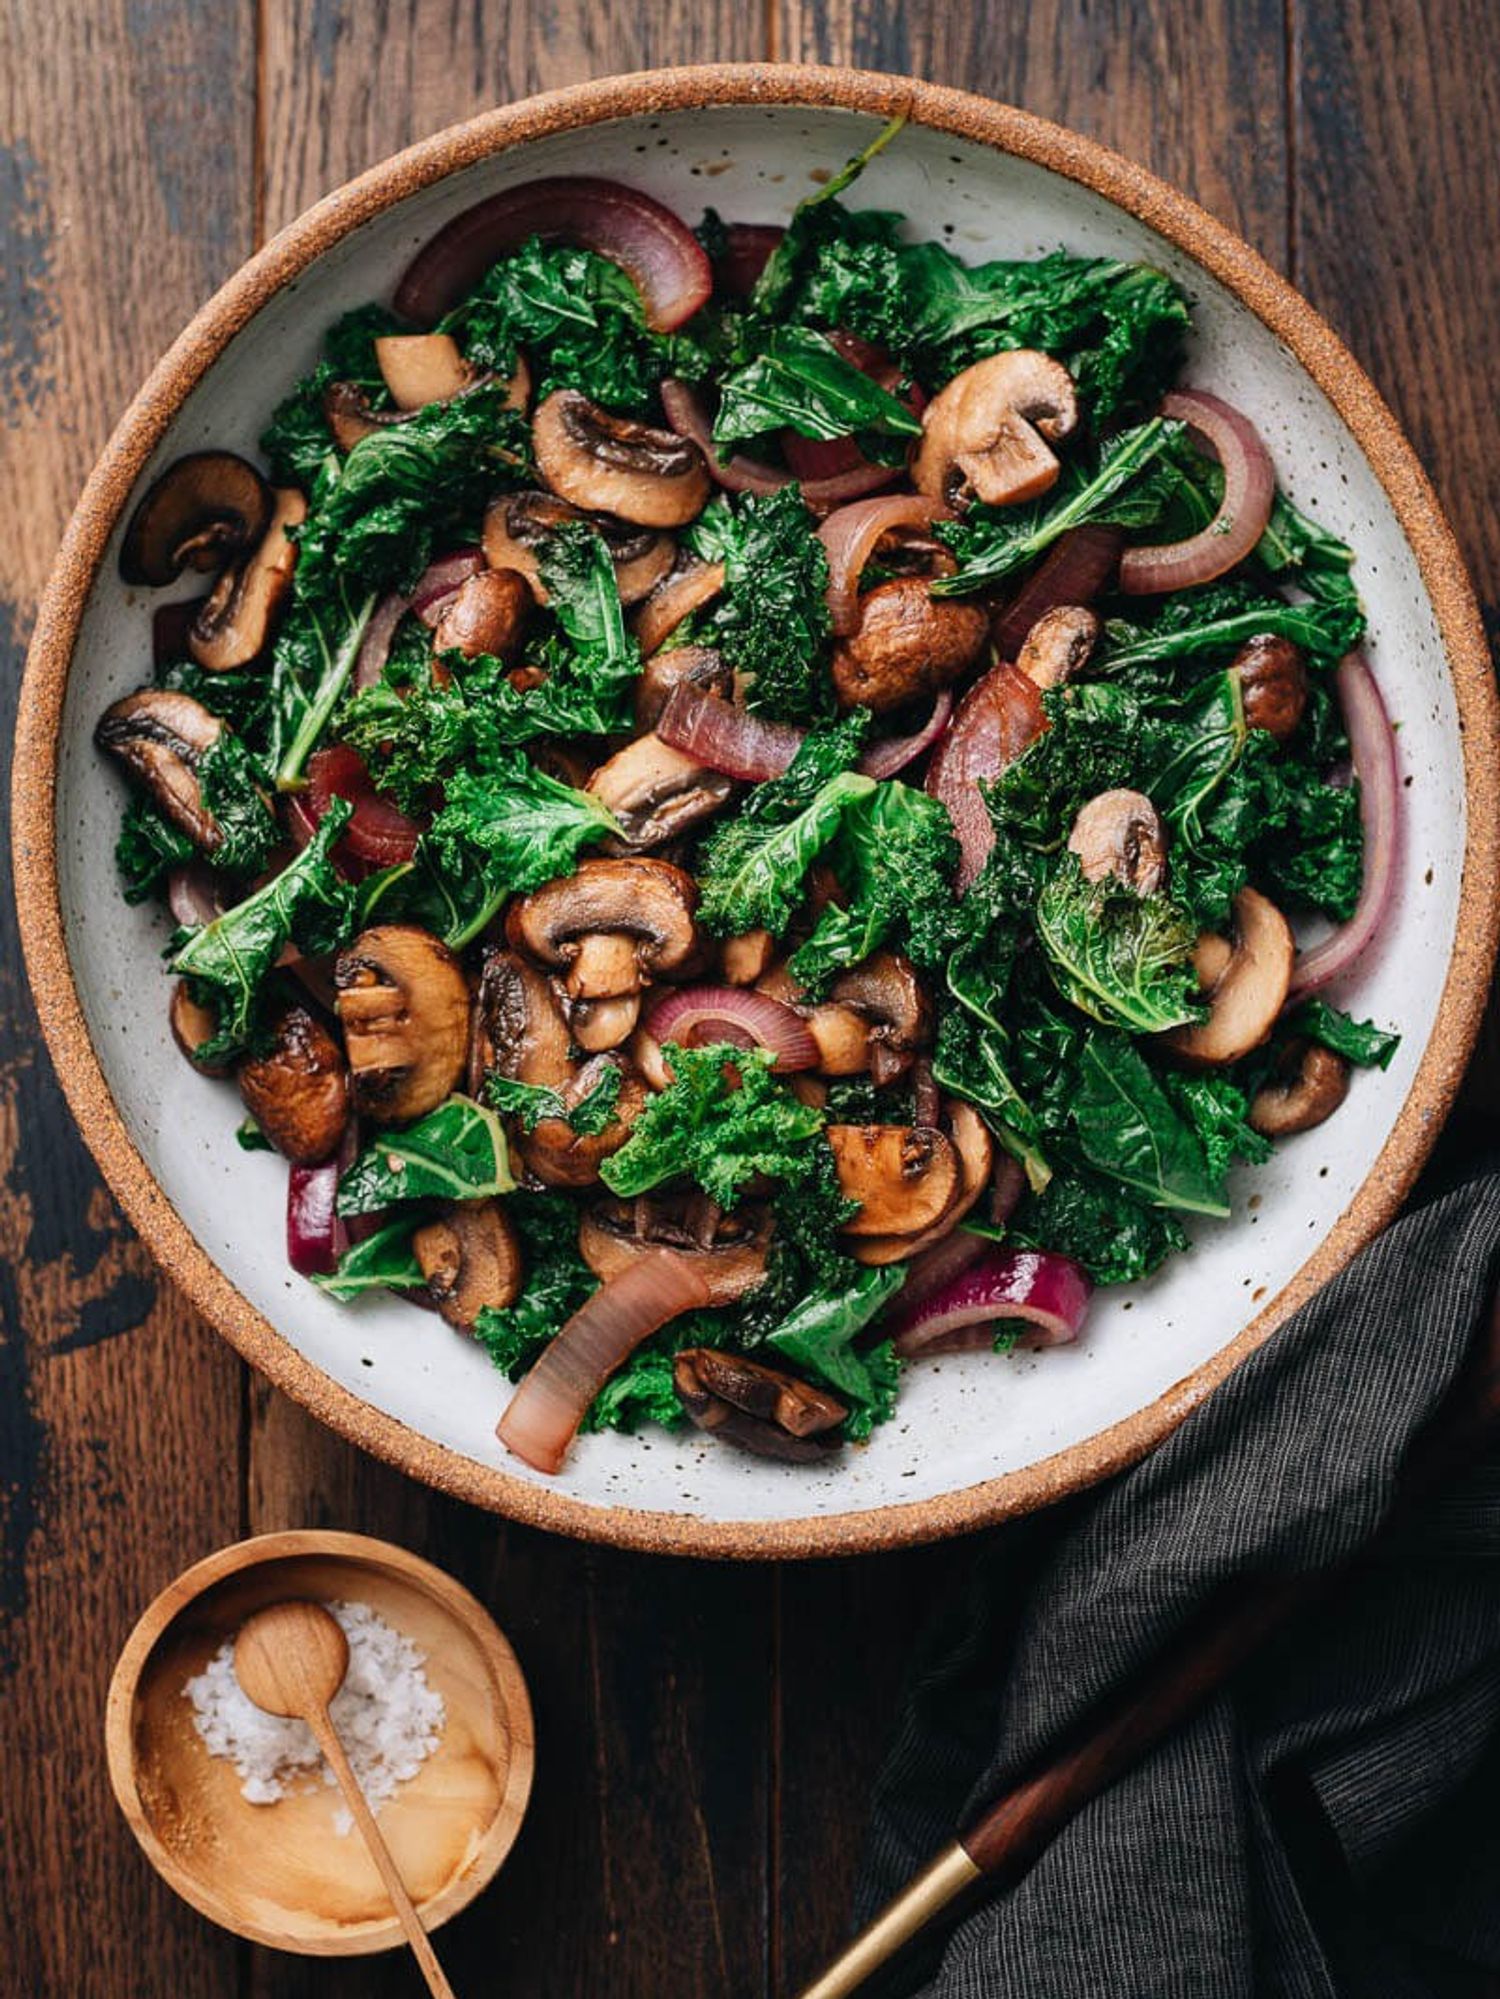 easy vegetable reciples kale stir fry with mushrooms and red onion